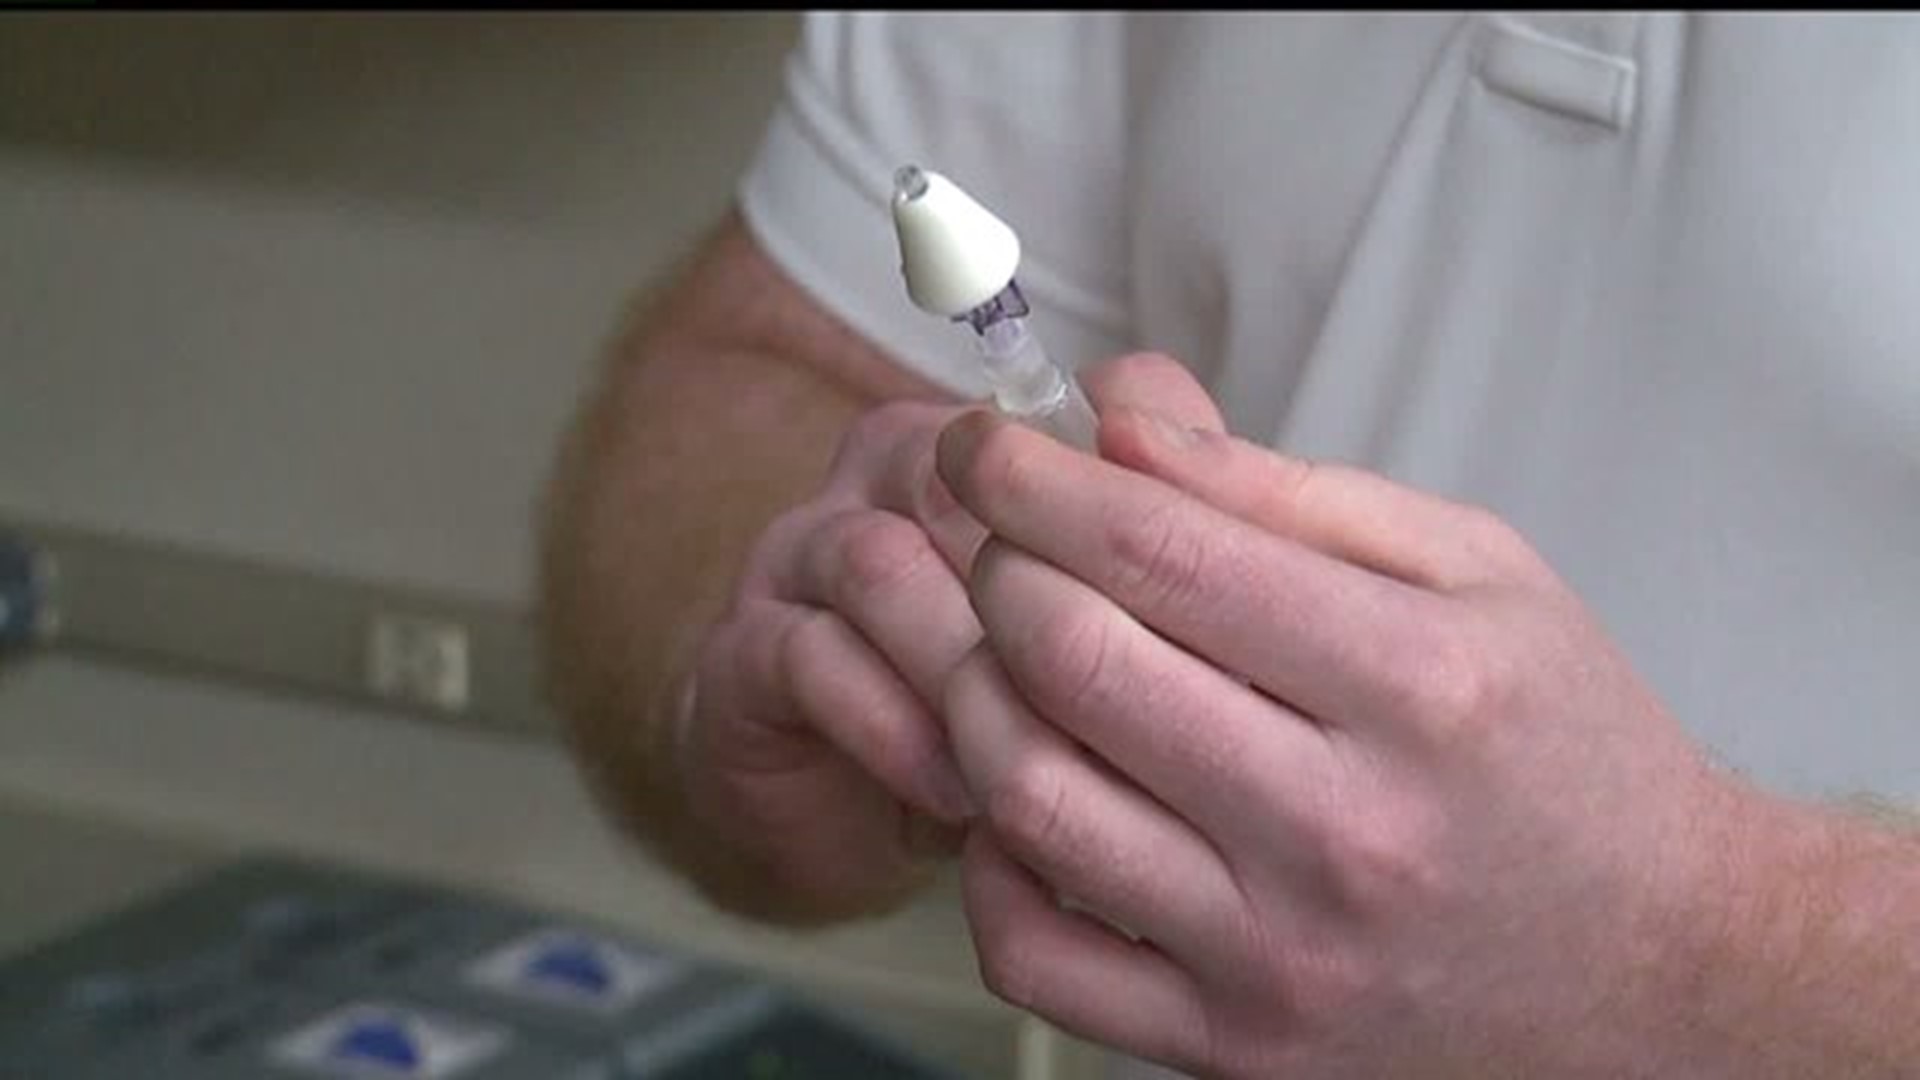 PA Police Departments to Carry Heroin Antidote